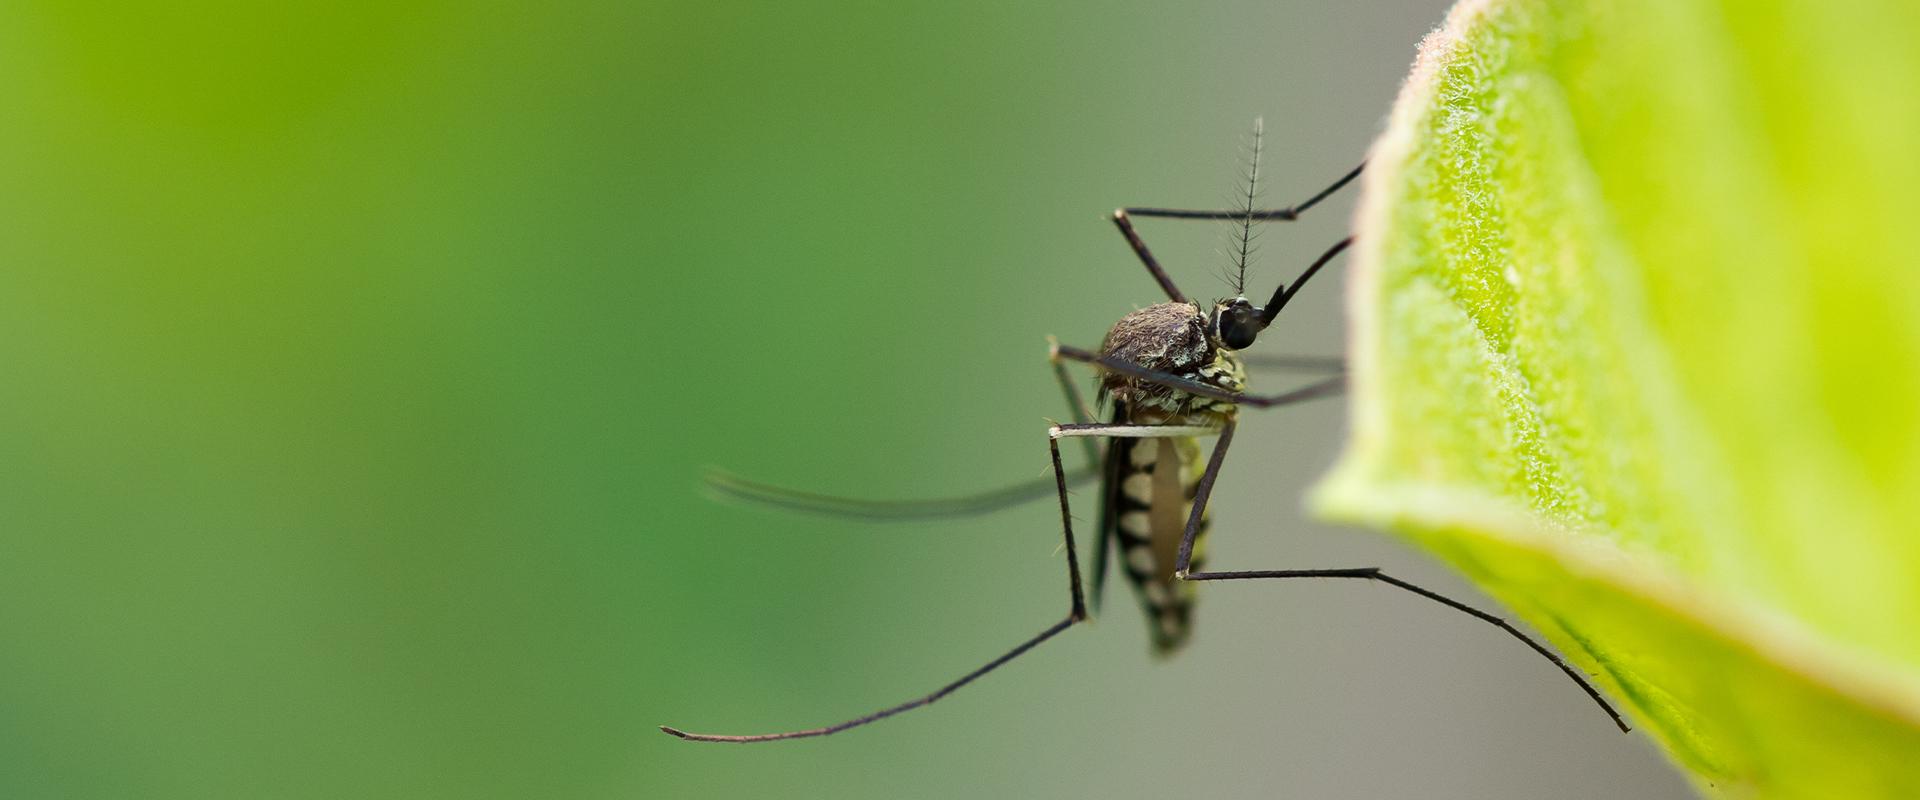 a mosquito on a green leaf